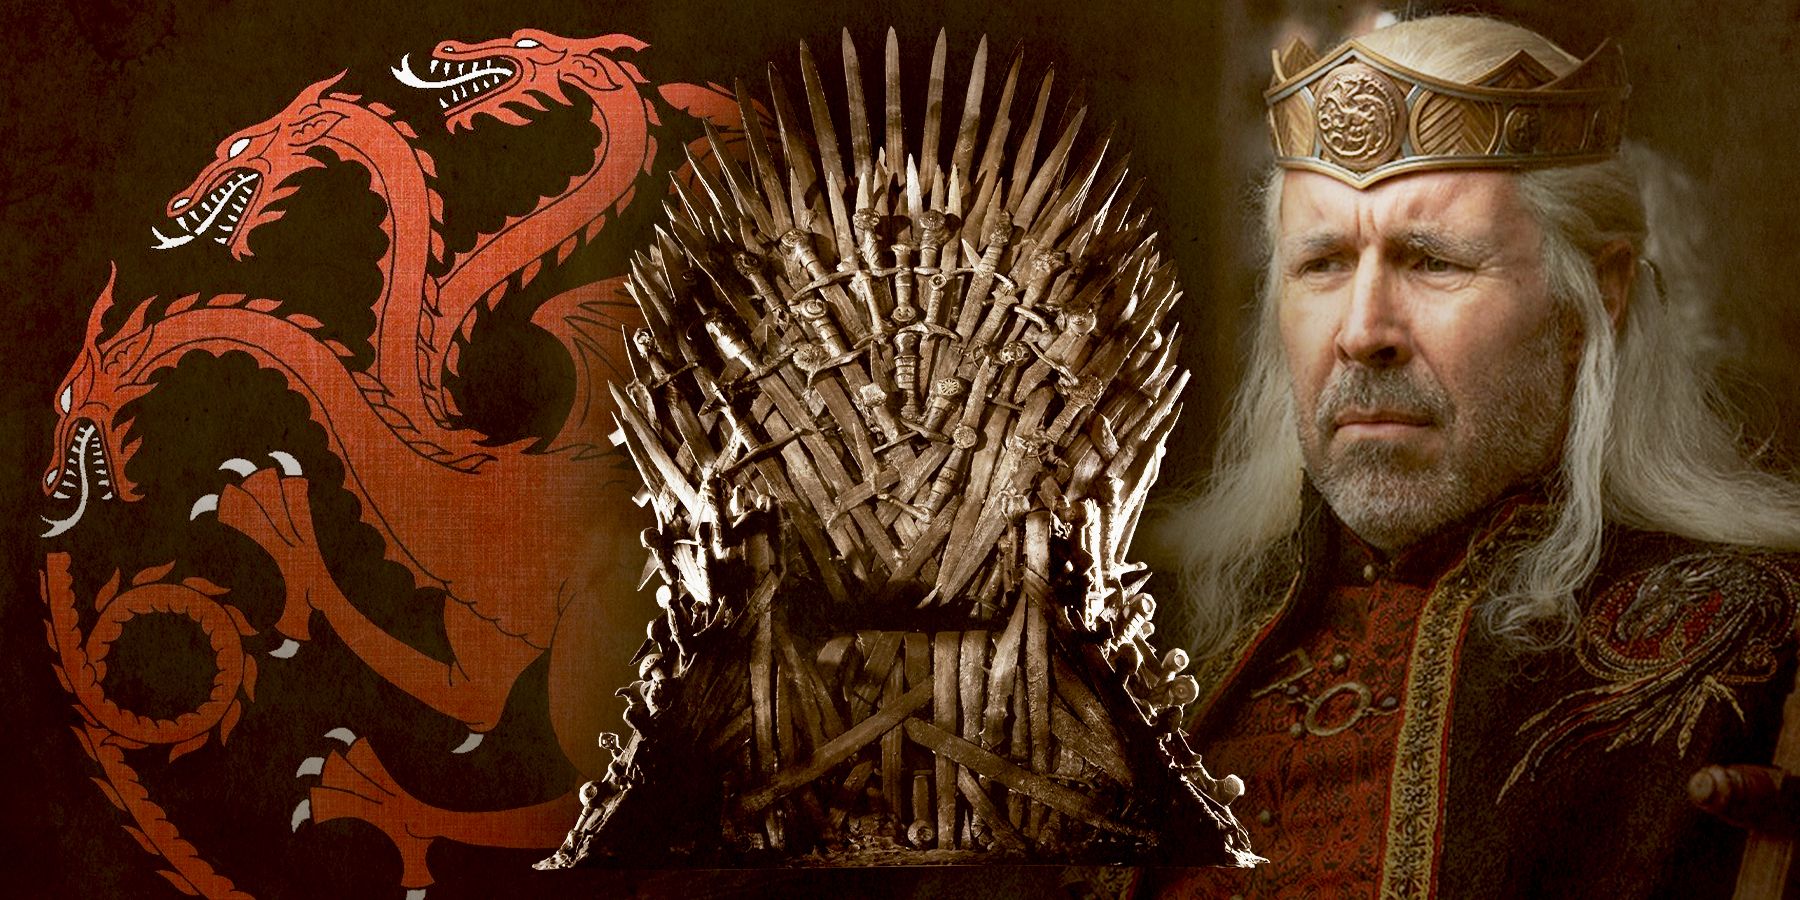 Who has been on the Iron Throne in Game of Thrones since season 1